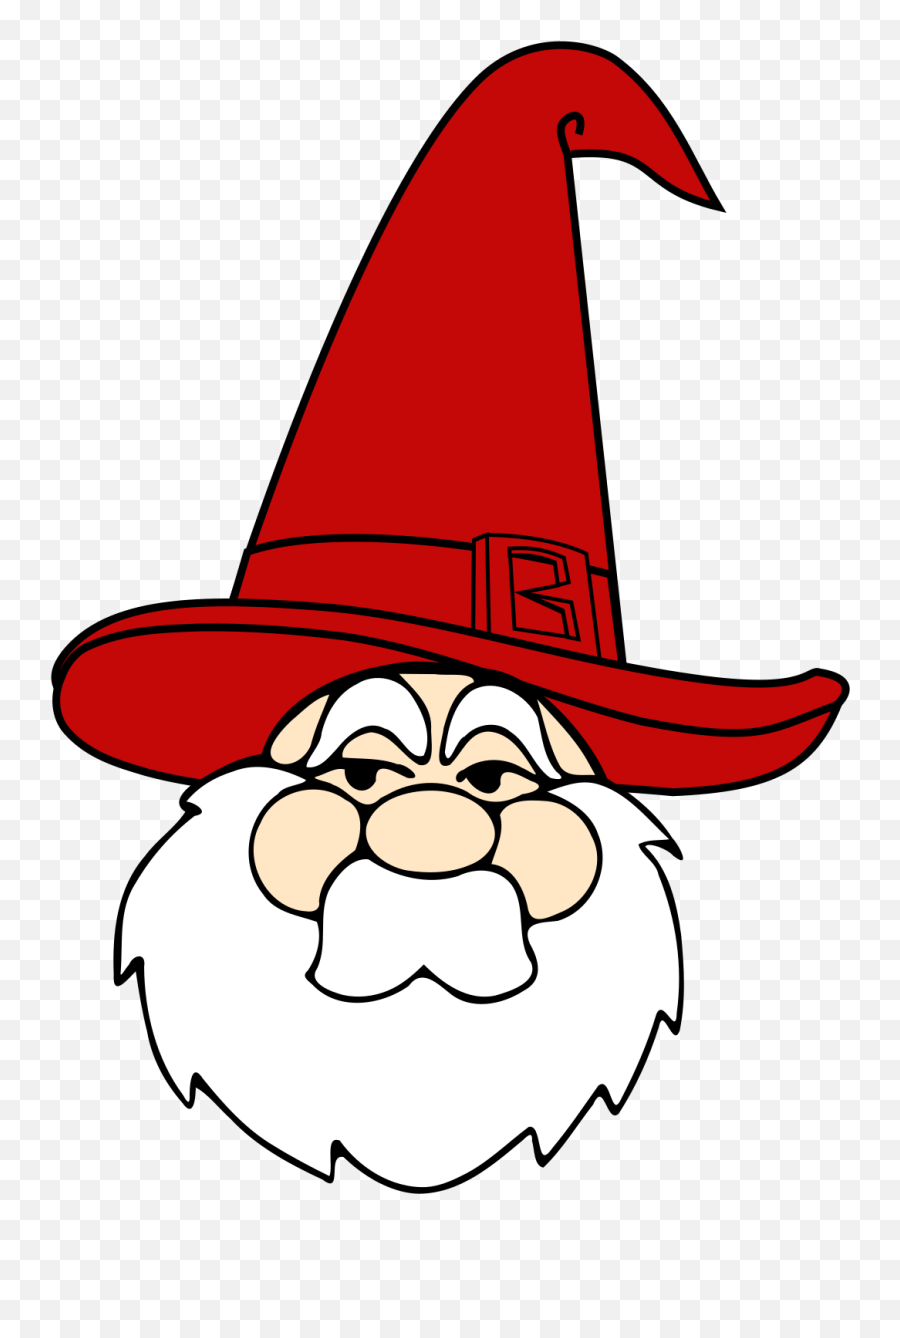 Wizard Red Hat Santa Claus - Santa Without Hat Clipart Santa Wizard Hat Emoji,Hat Clipart